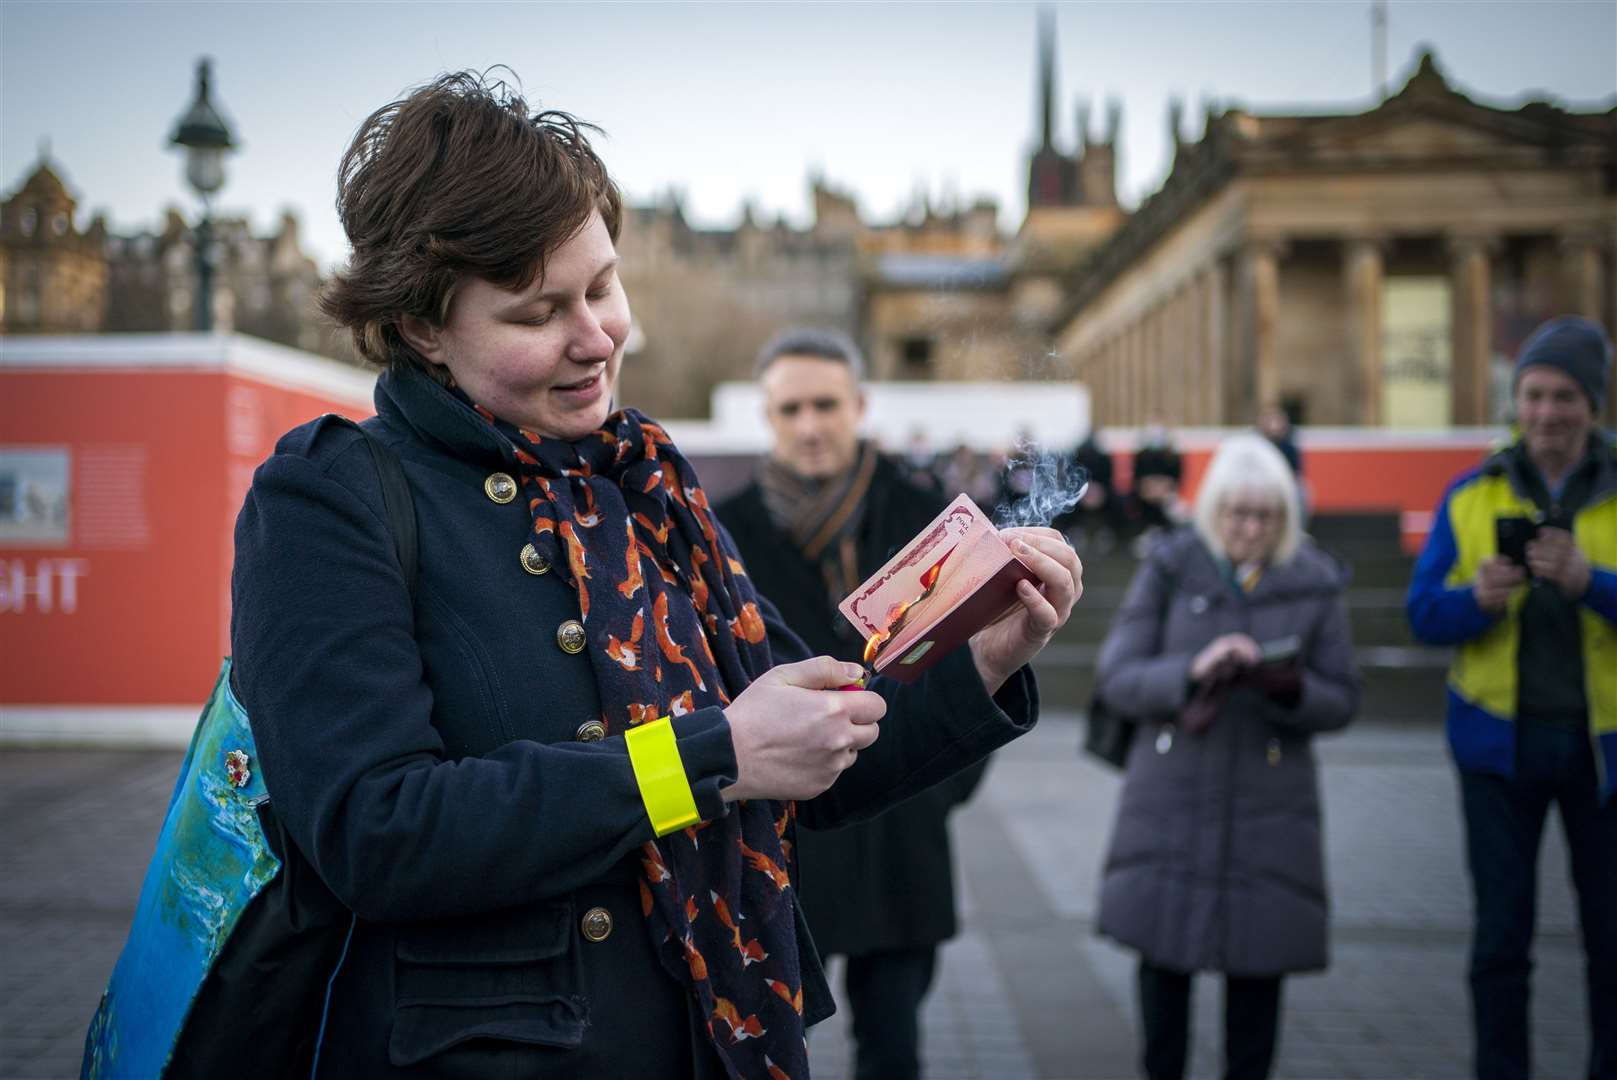 Anna Jakubova sets fire to her Russian passport with a lighter in the centre of Edinburgh to protest Putin’s invasion (Jane Barlow/PA)